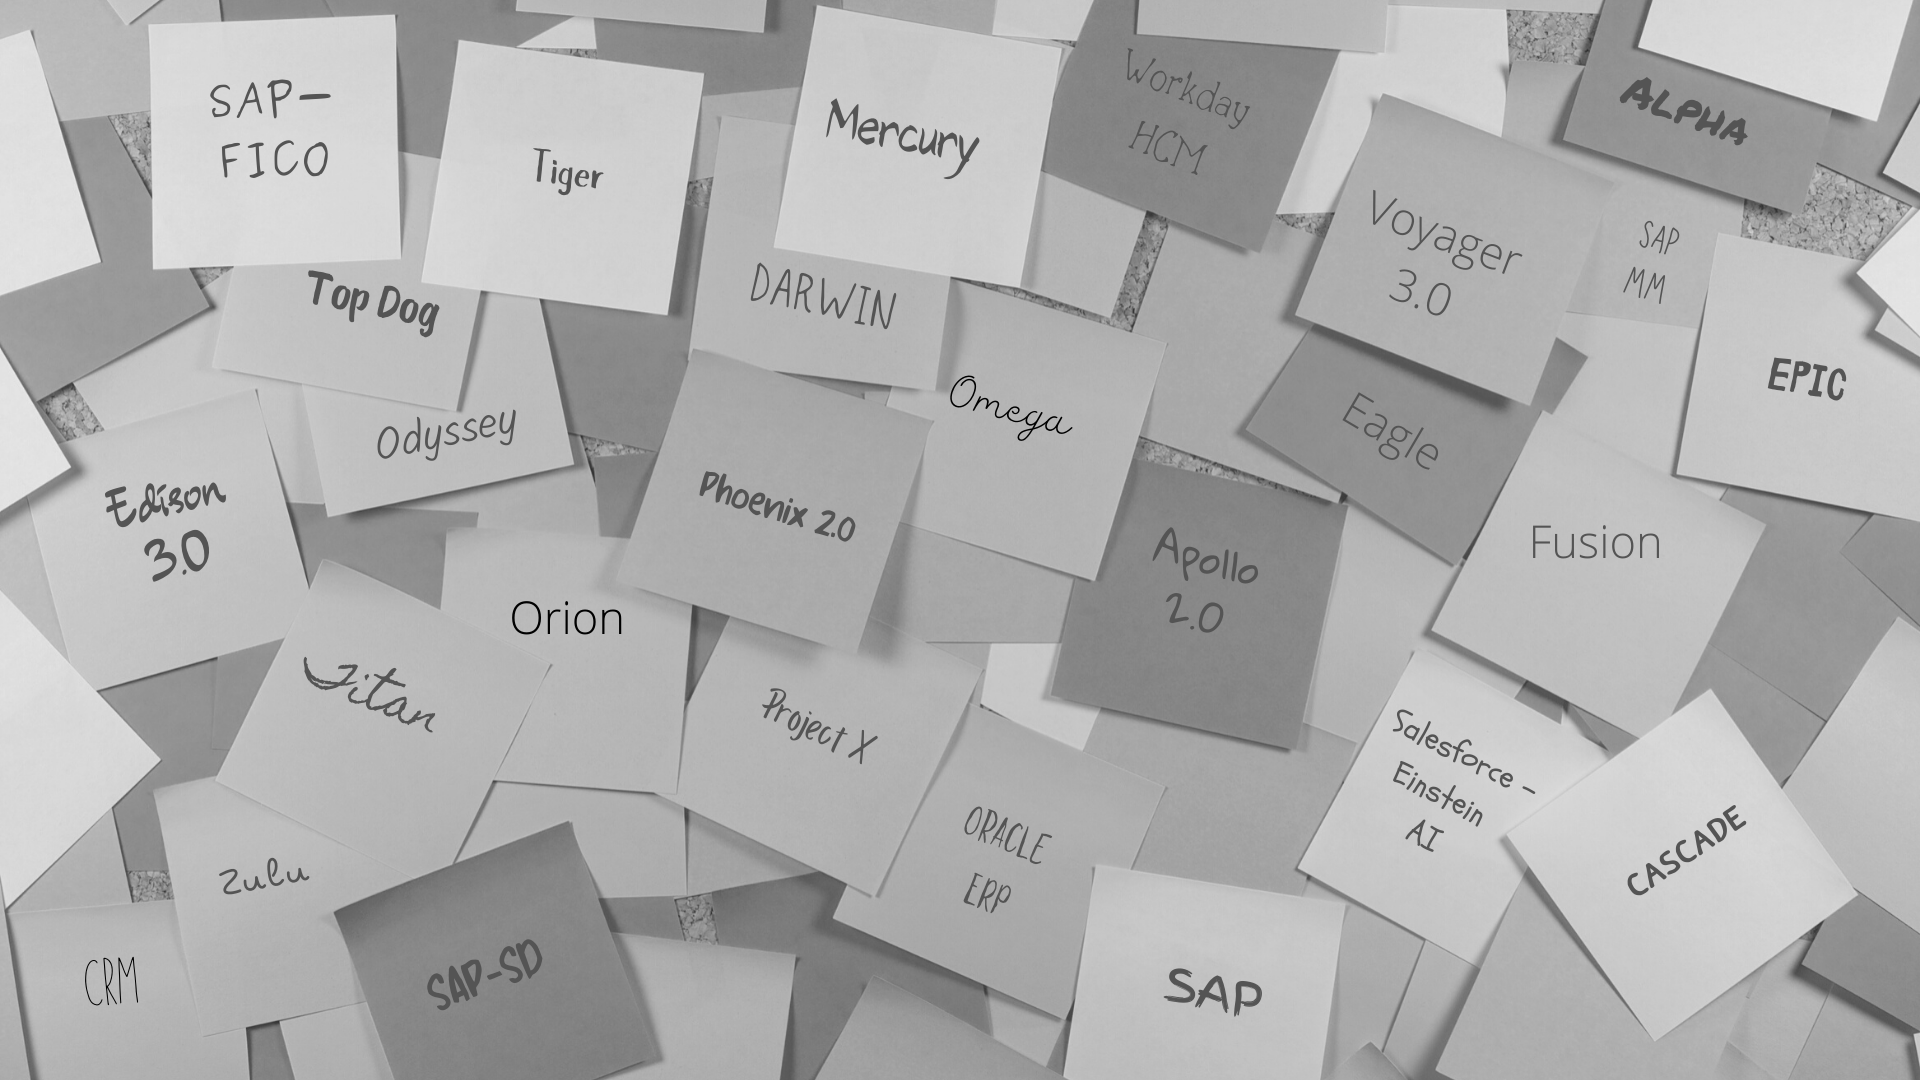 post-it-notes for information technology project names. Learn to achieve real business value by aligning strategy with capabilities.